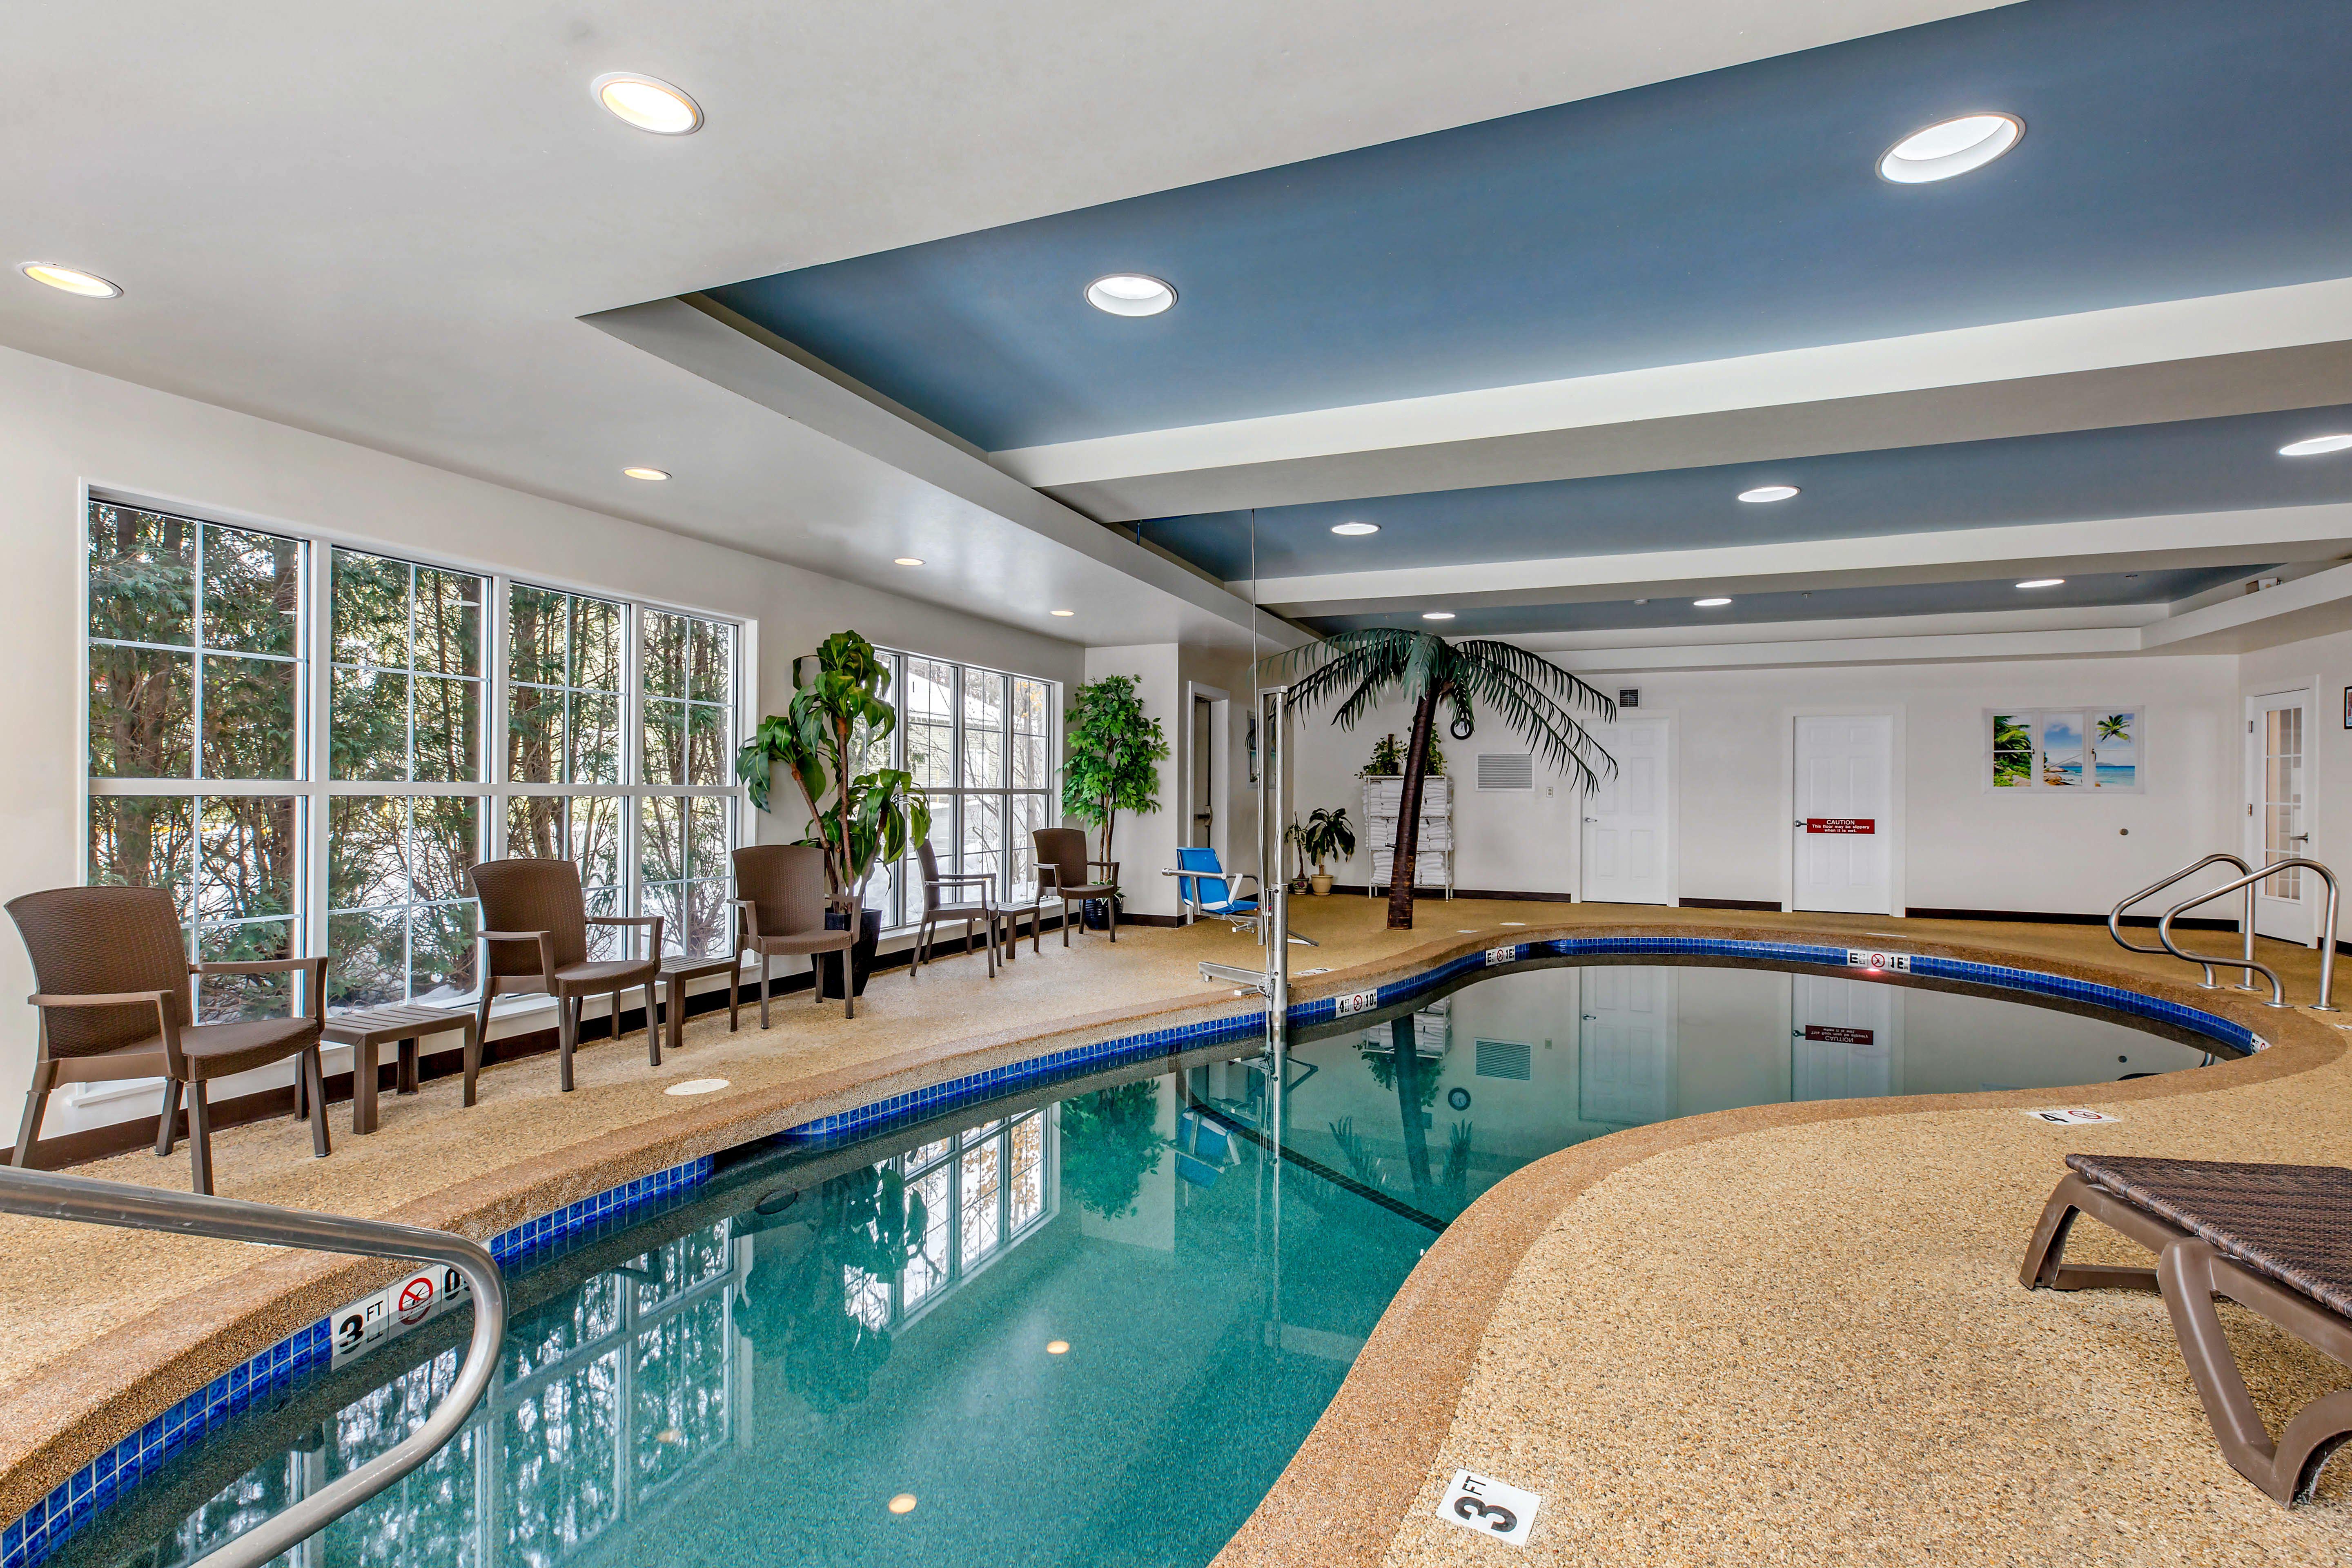 Indoor pool area with lounge area